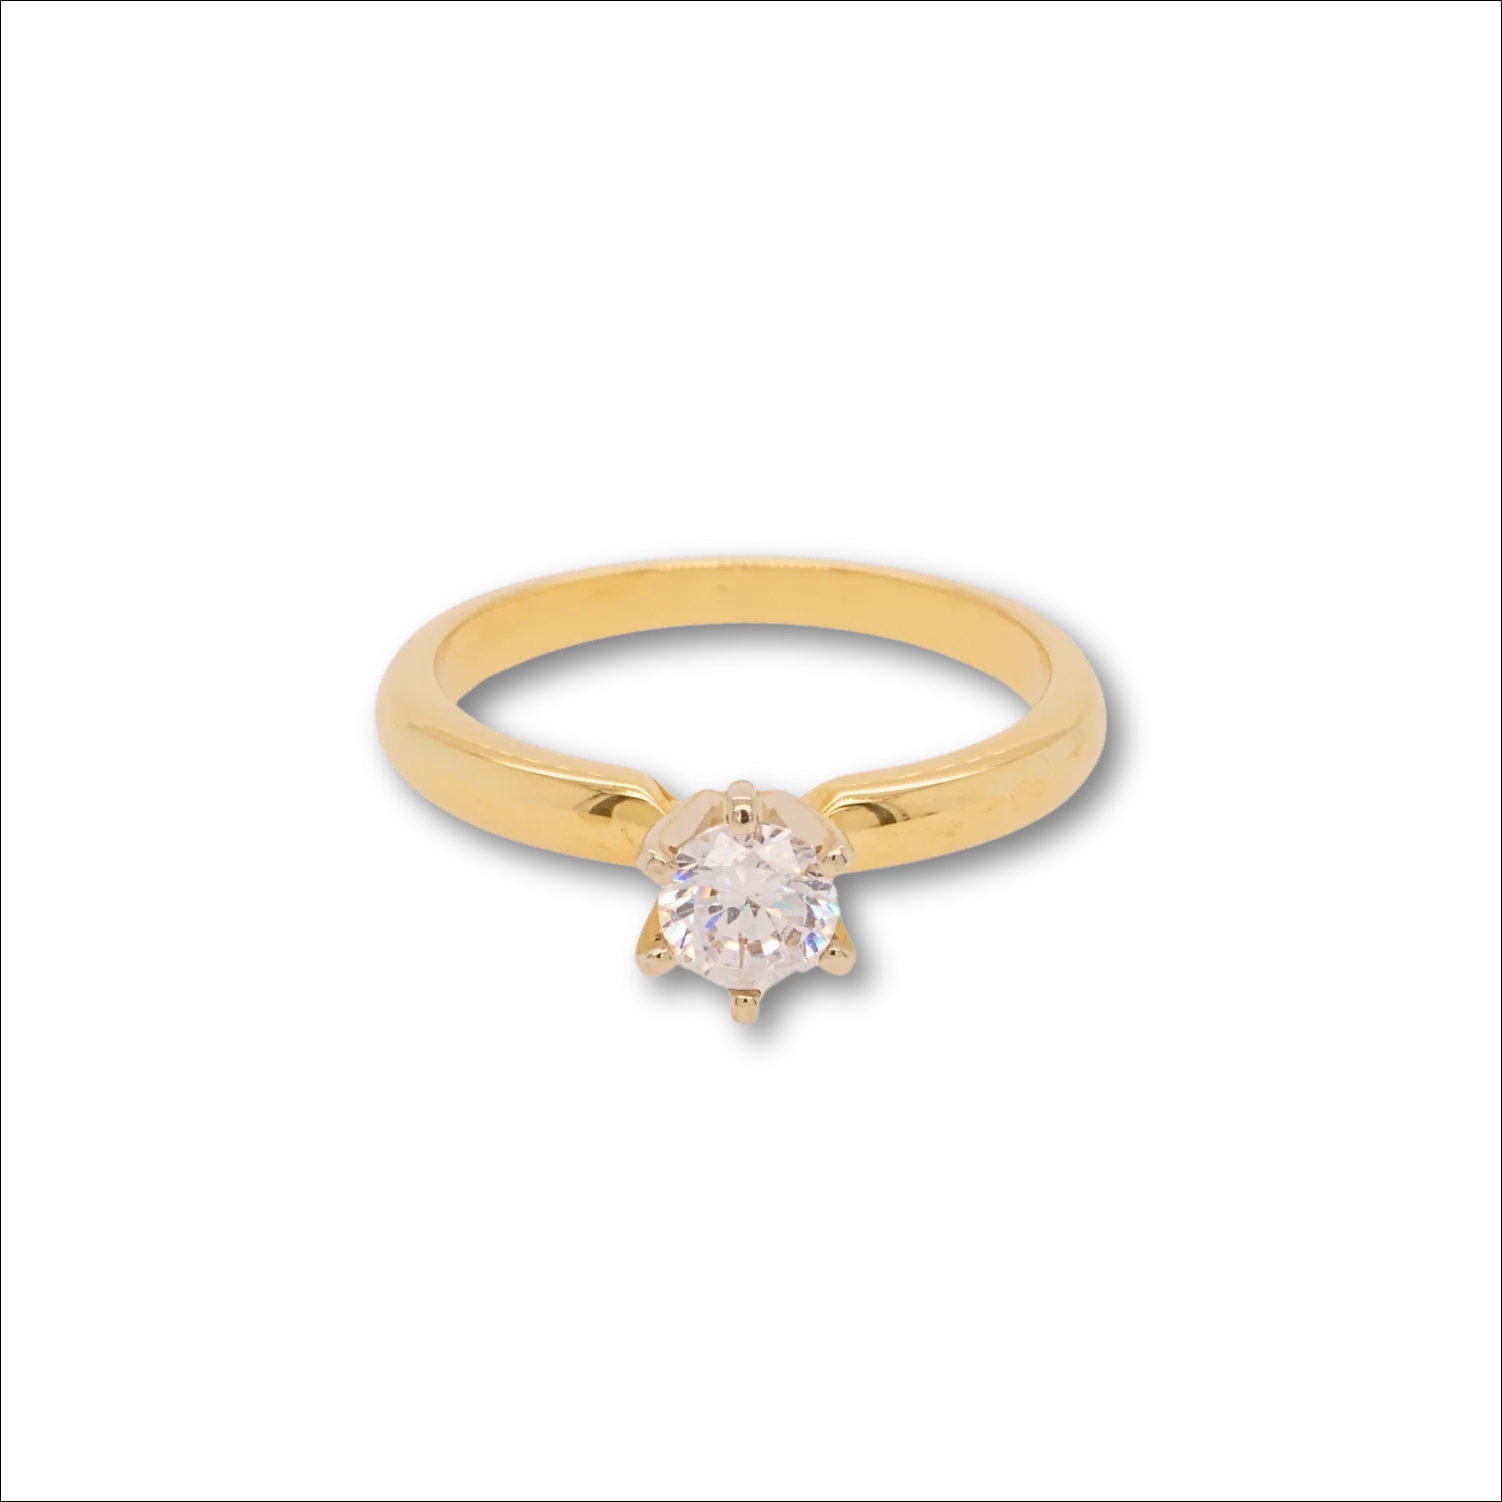 Timeless Elegance: The 18k Gold with CZ Ring | Rings